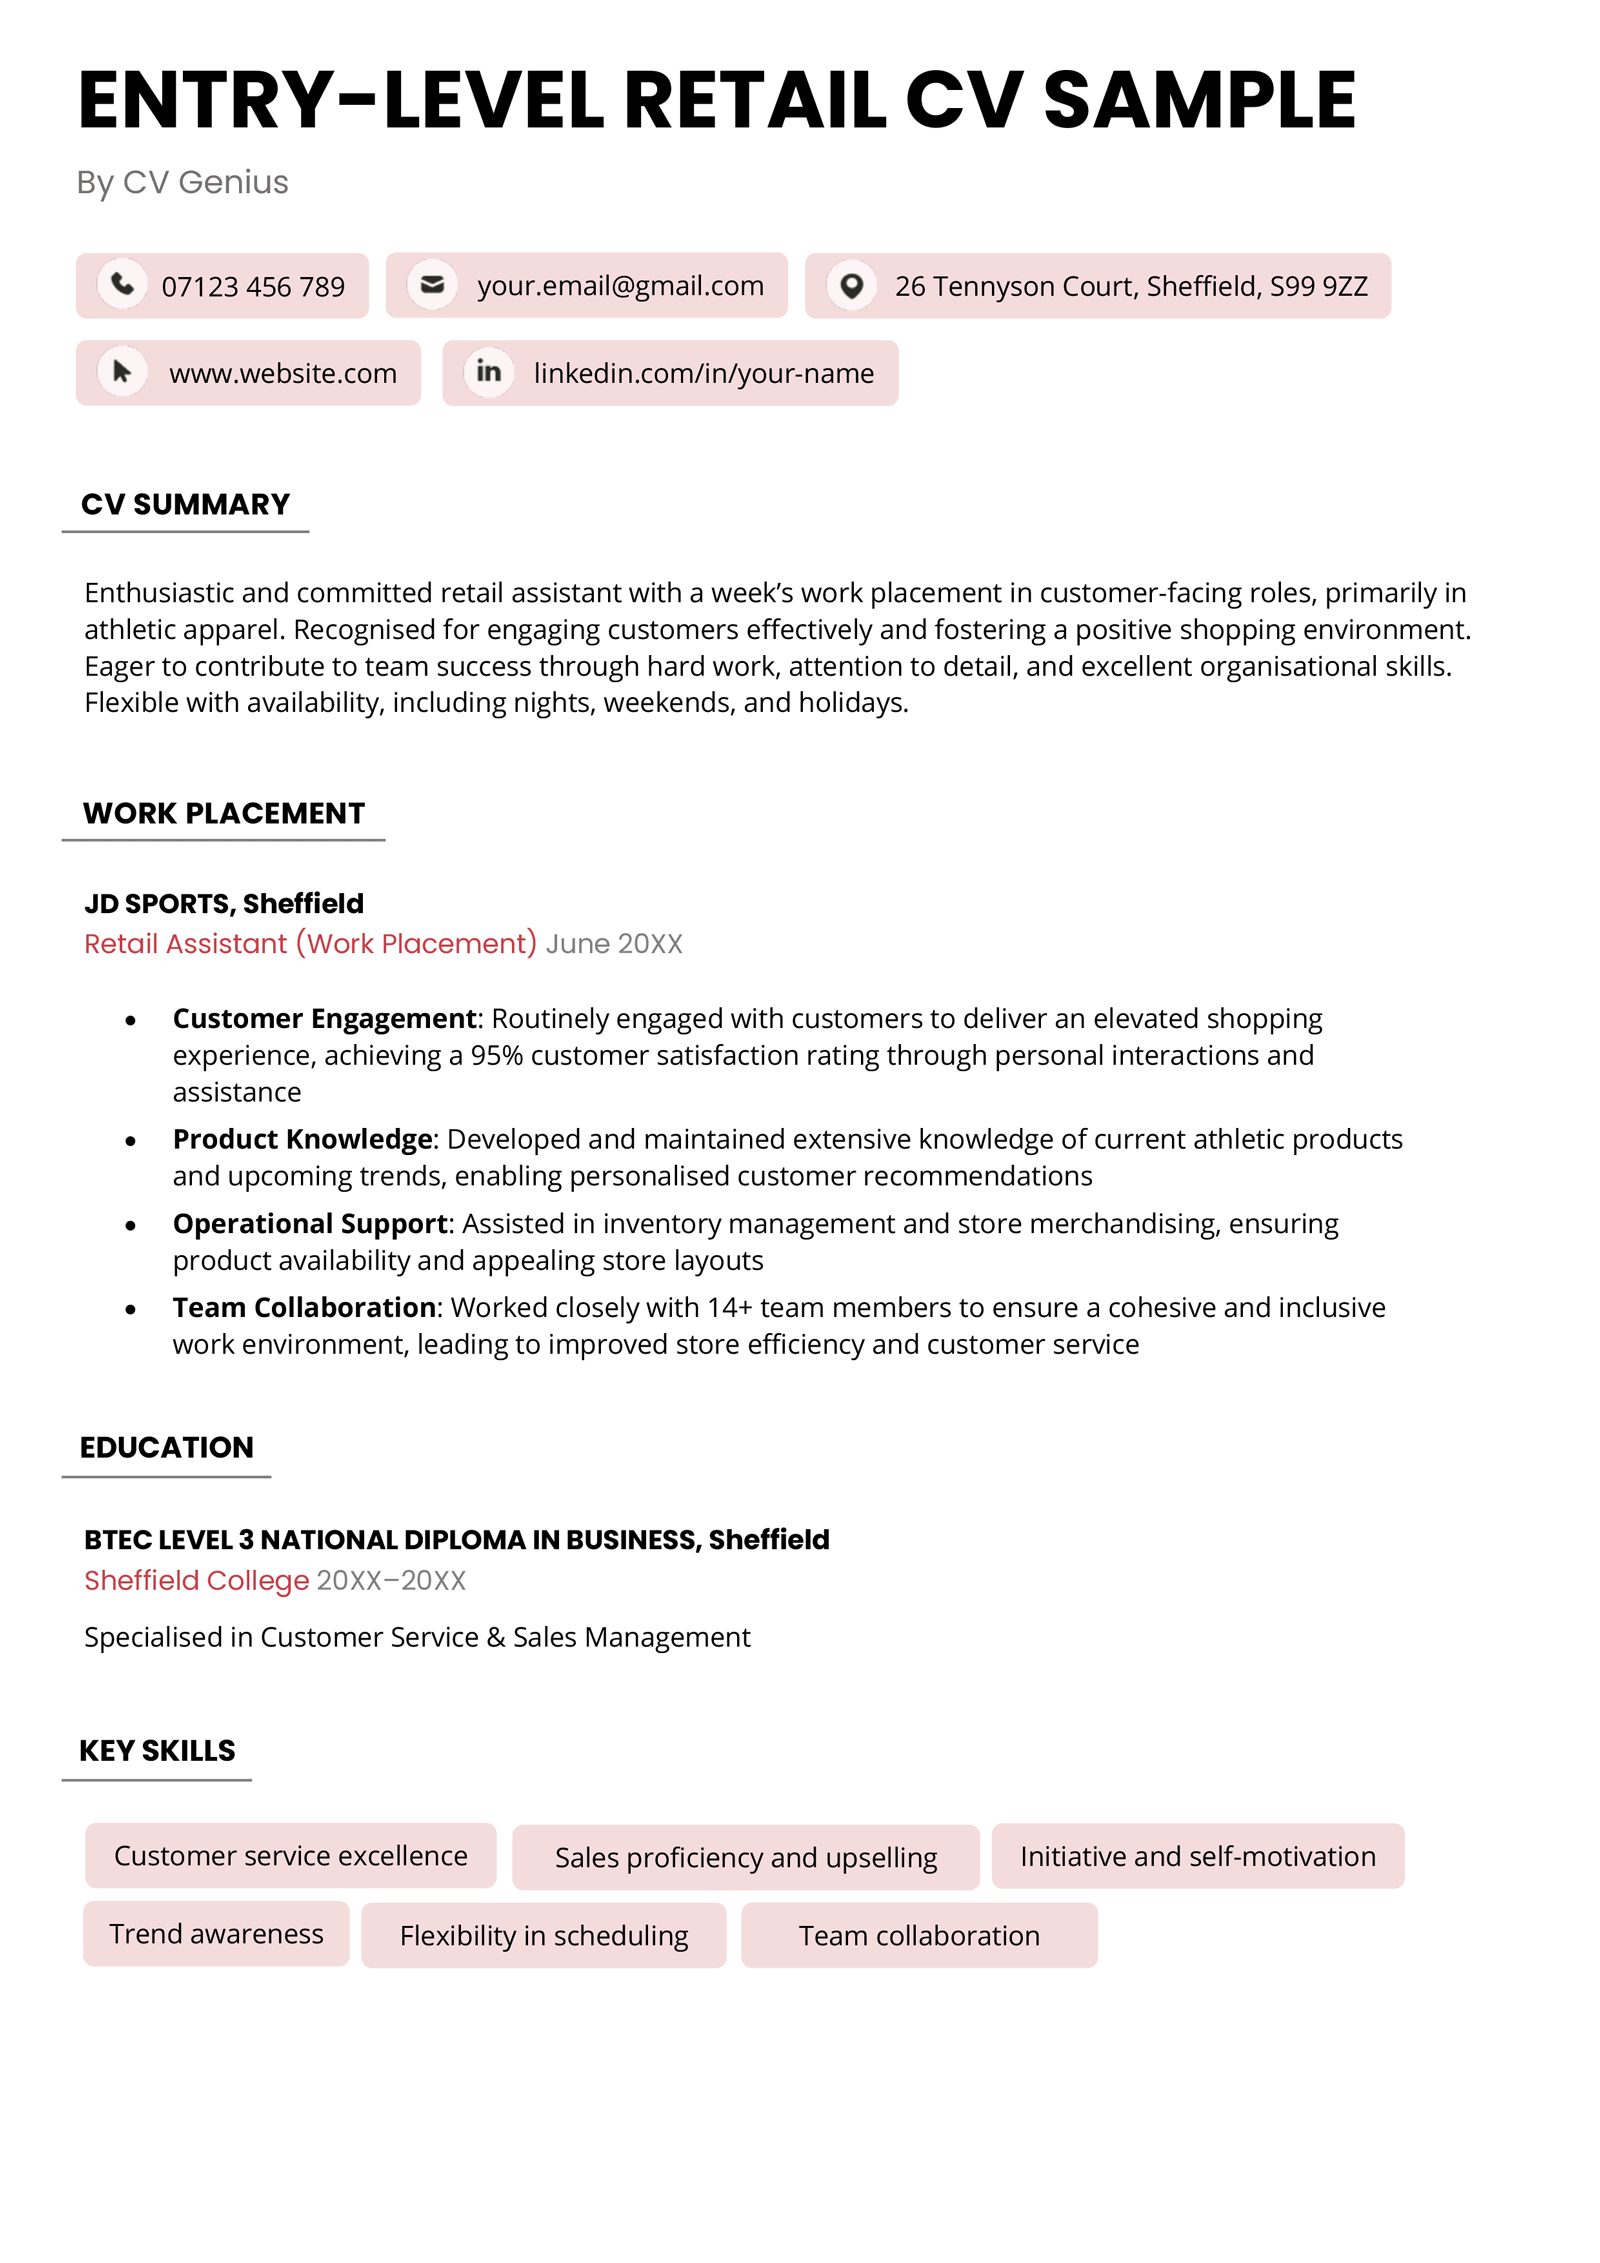 An entry-level retail CV example that uses 'button' components to draw attention to key information.